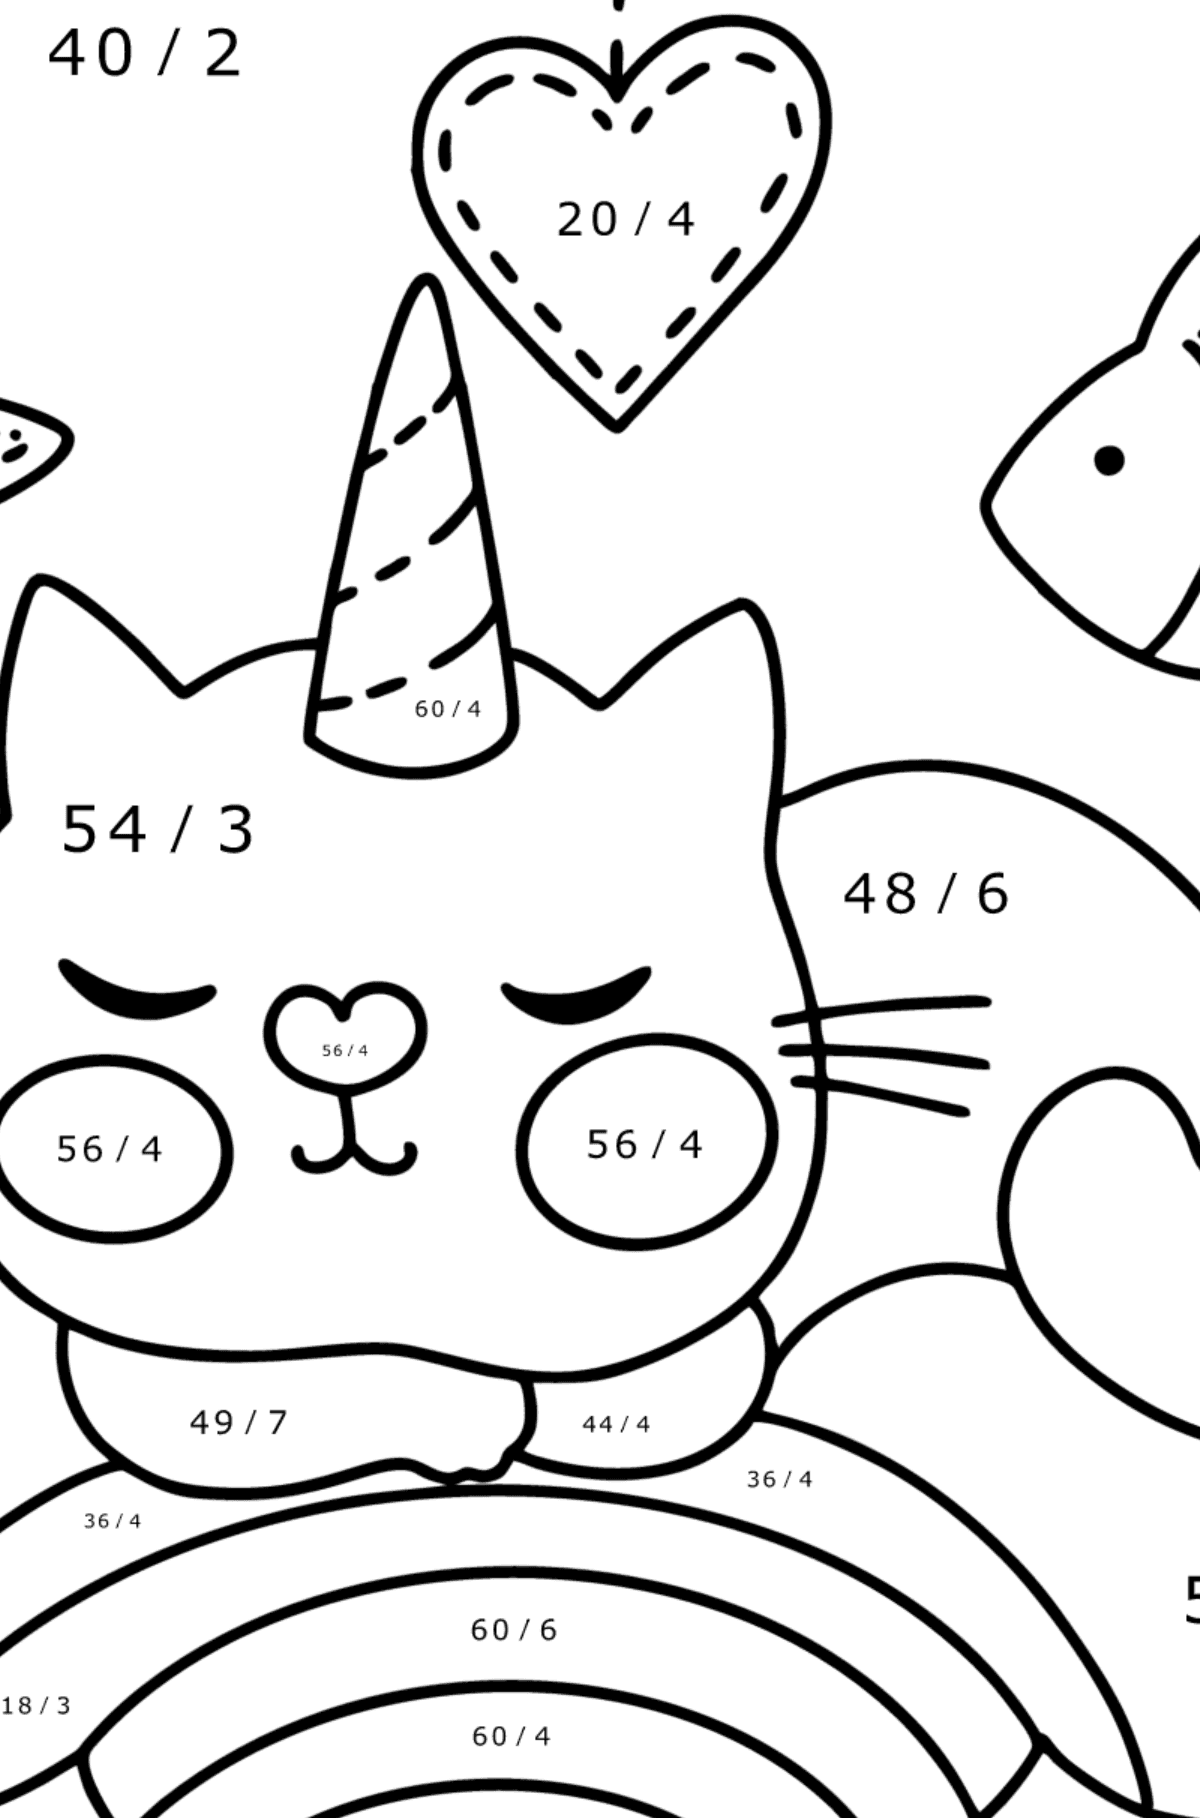 Cute cat unicorn coloring page - Math Coloring - Division for Kids